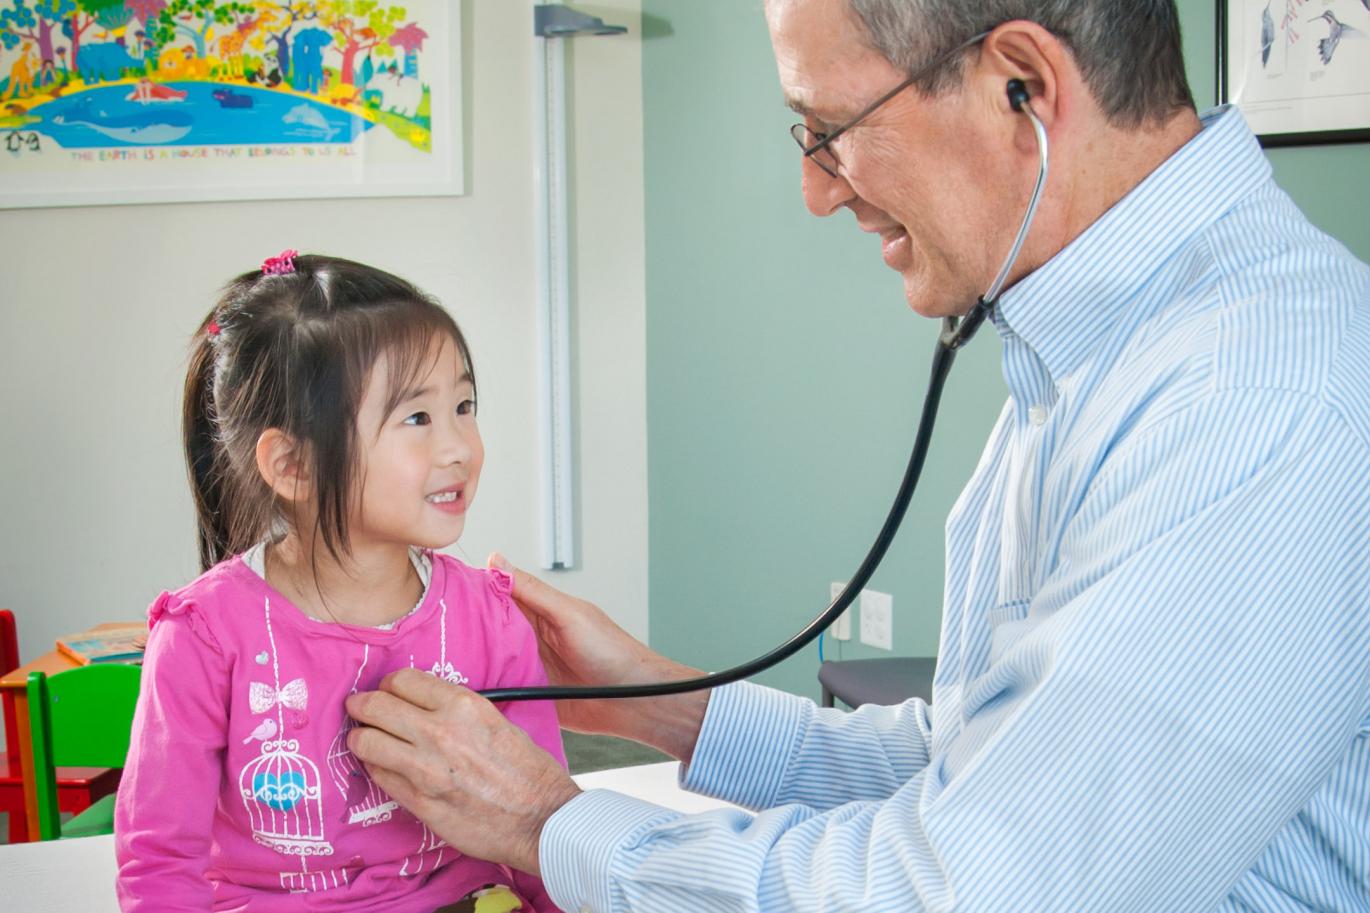 Dr. Newmark cares for a pediatric patient